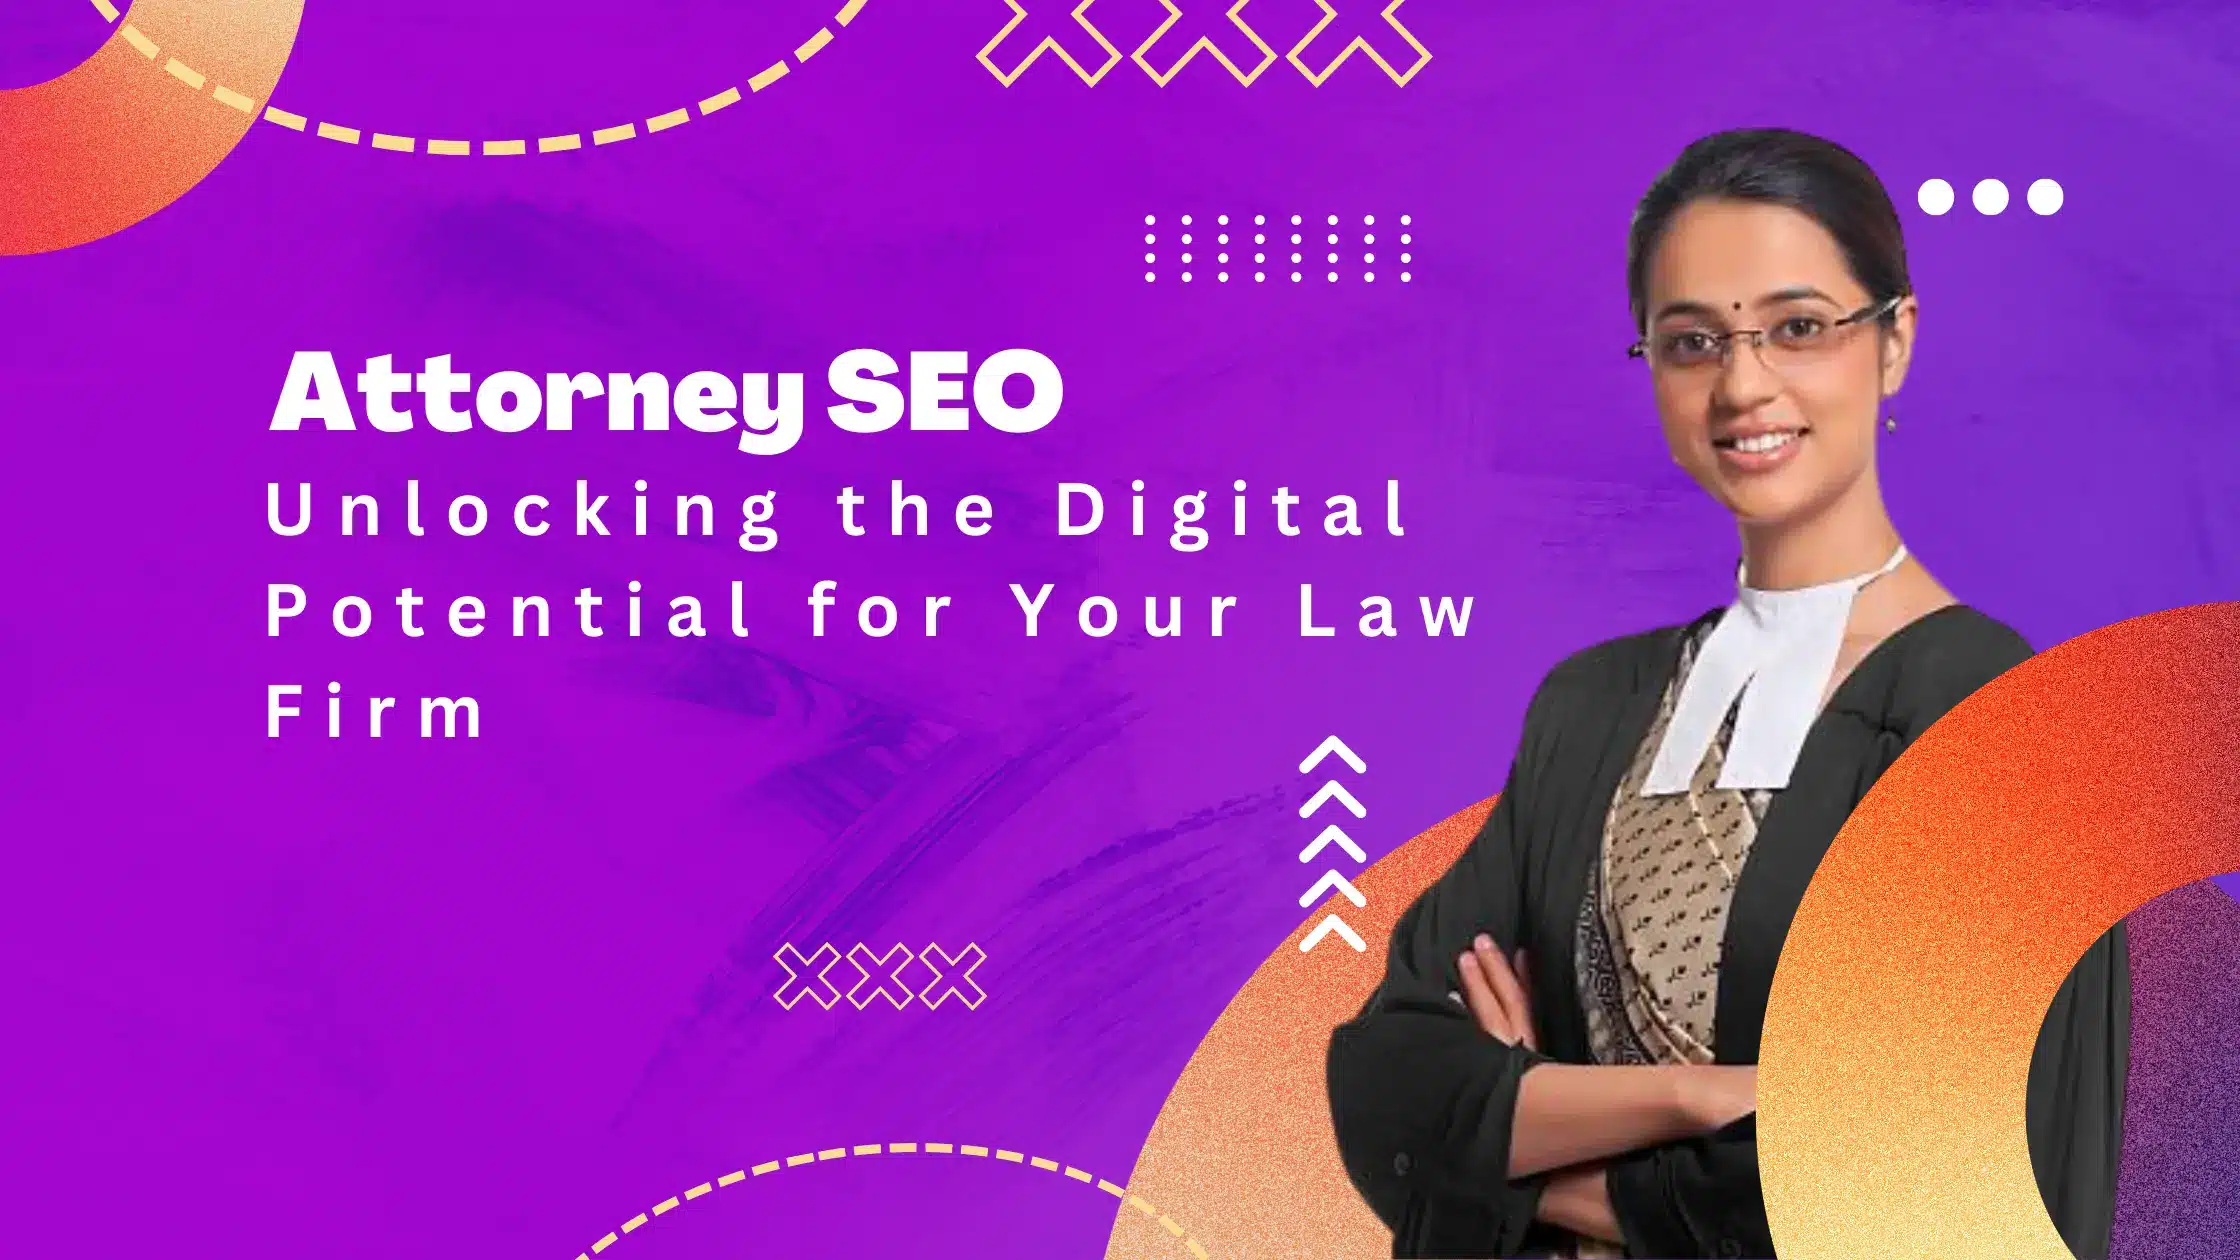 Attorney SEO Service by DigiBro - Elevate law firm online visibility with expert SEO strategies.